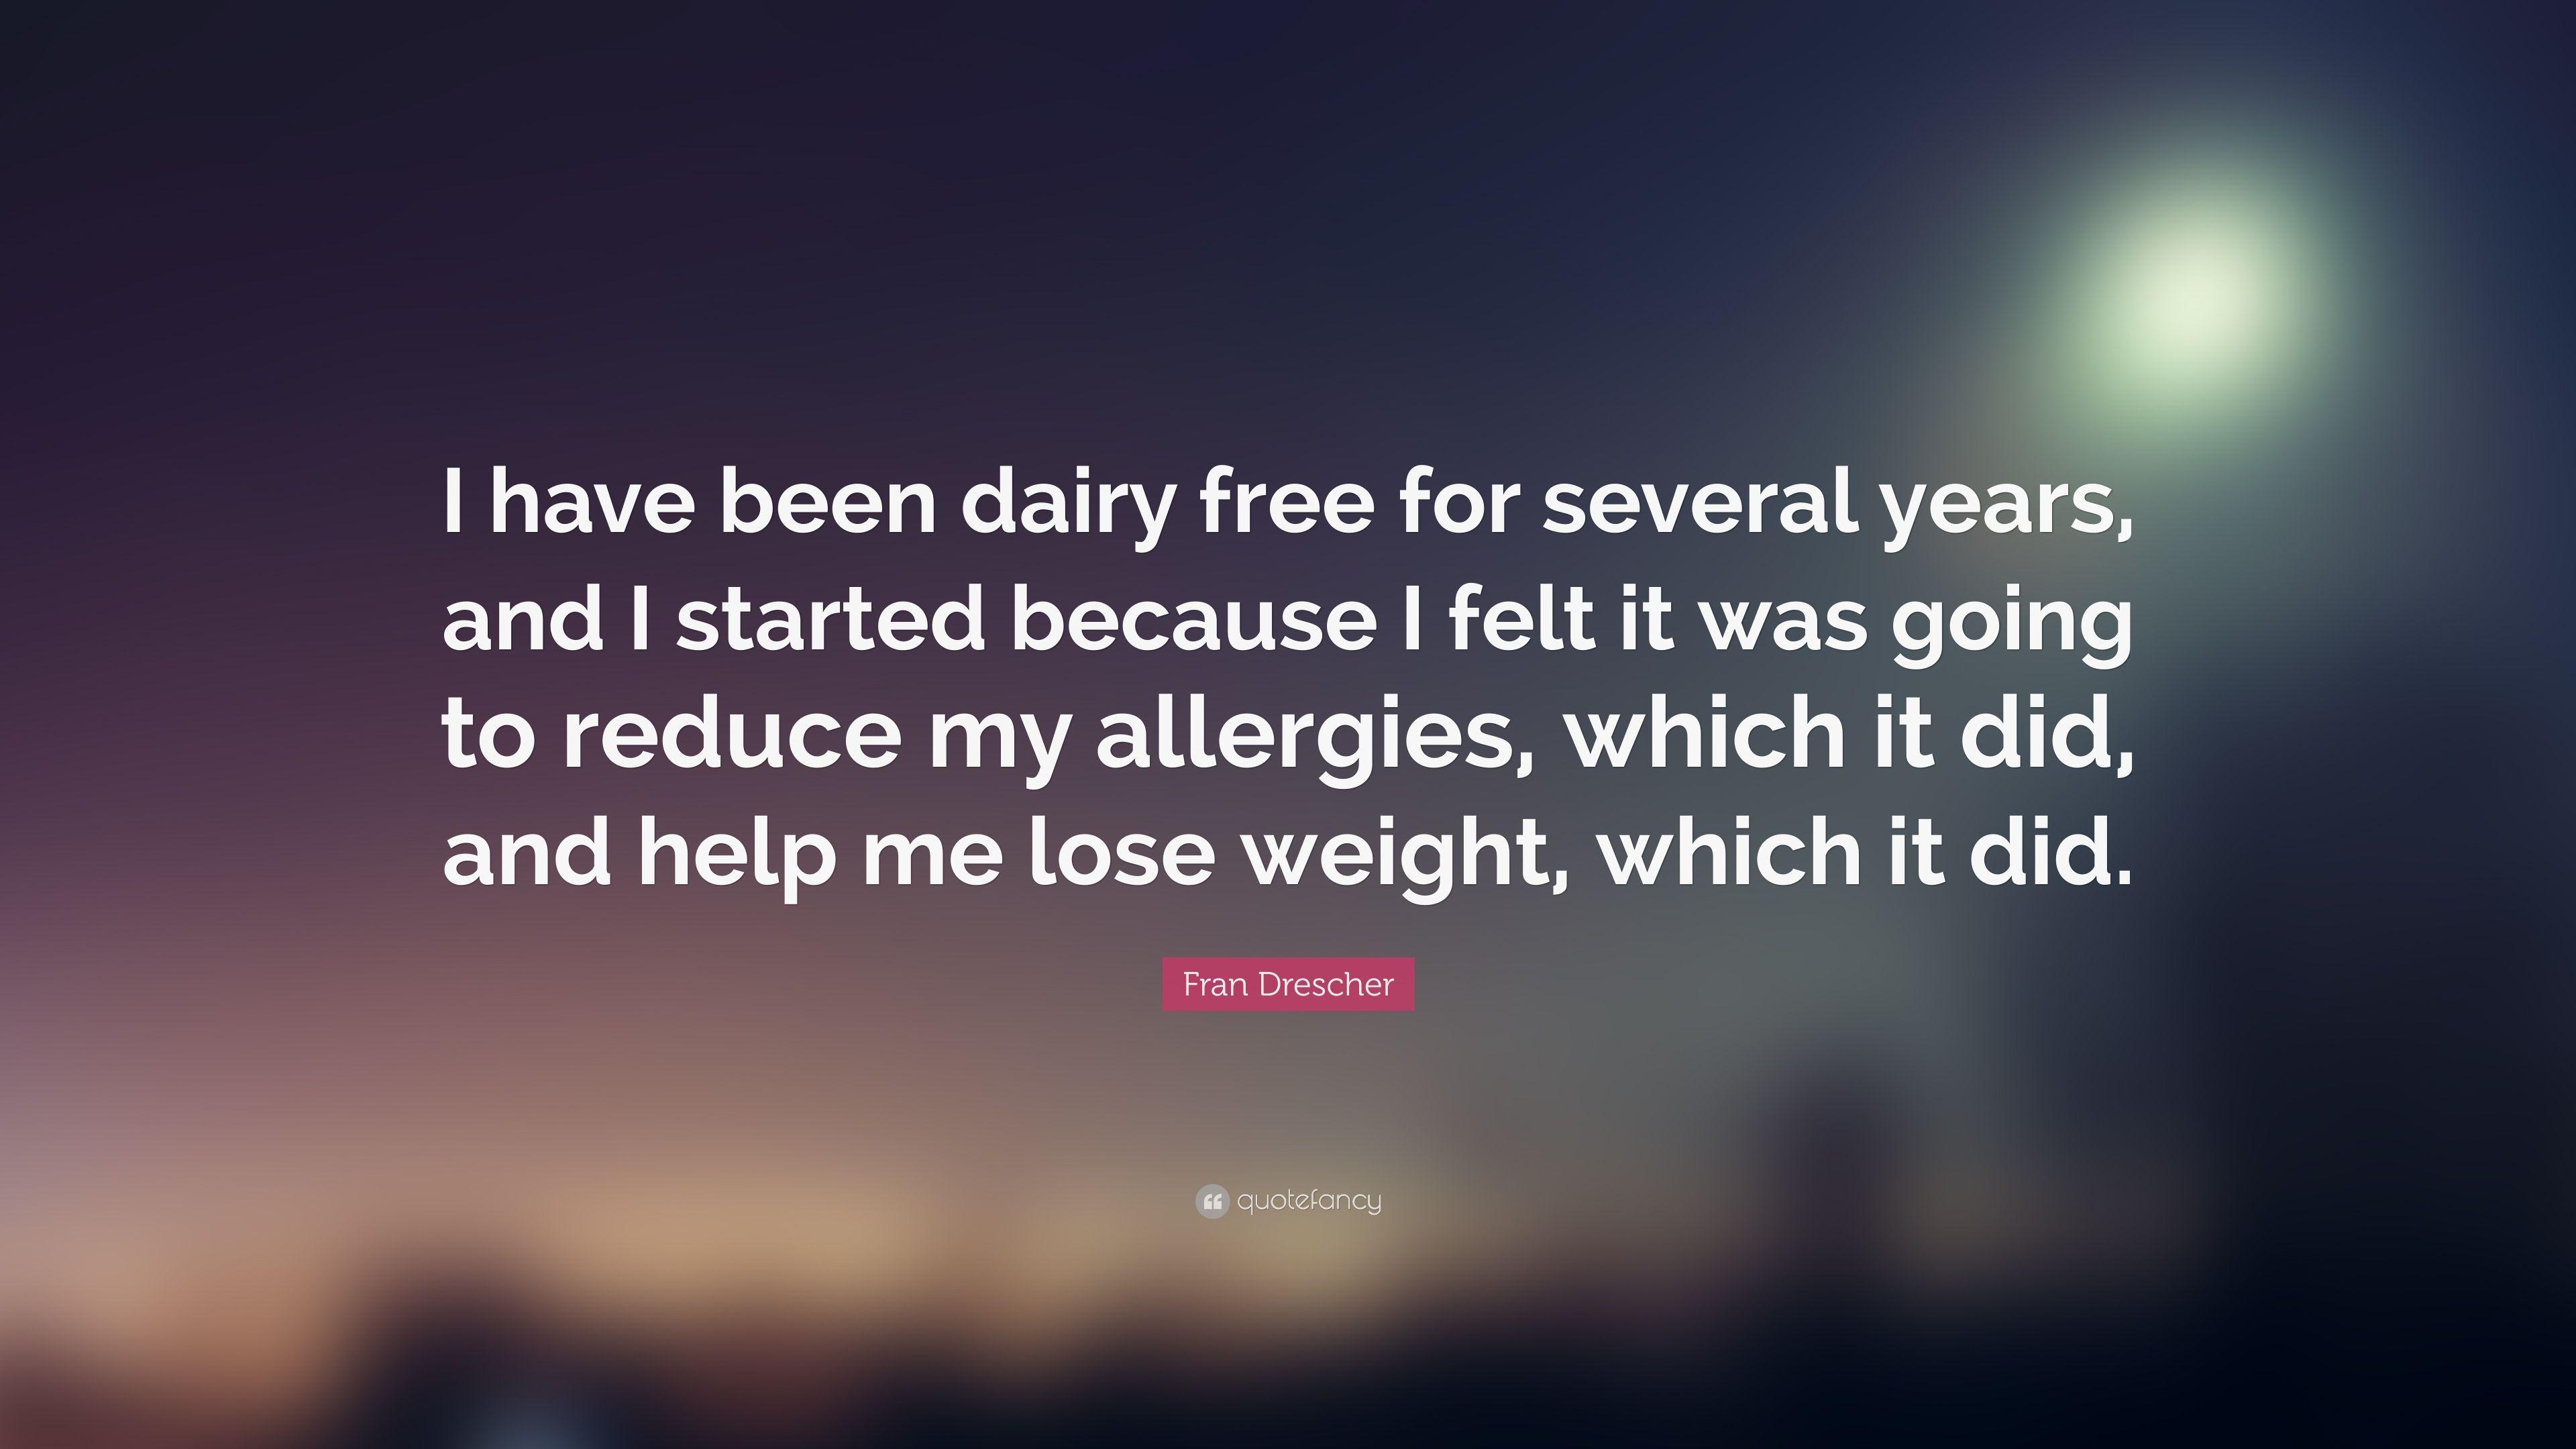 Fran Drescher Quote: “I have been dairy free for several years